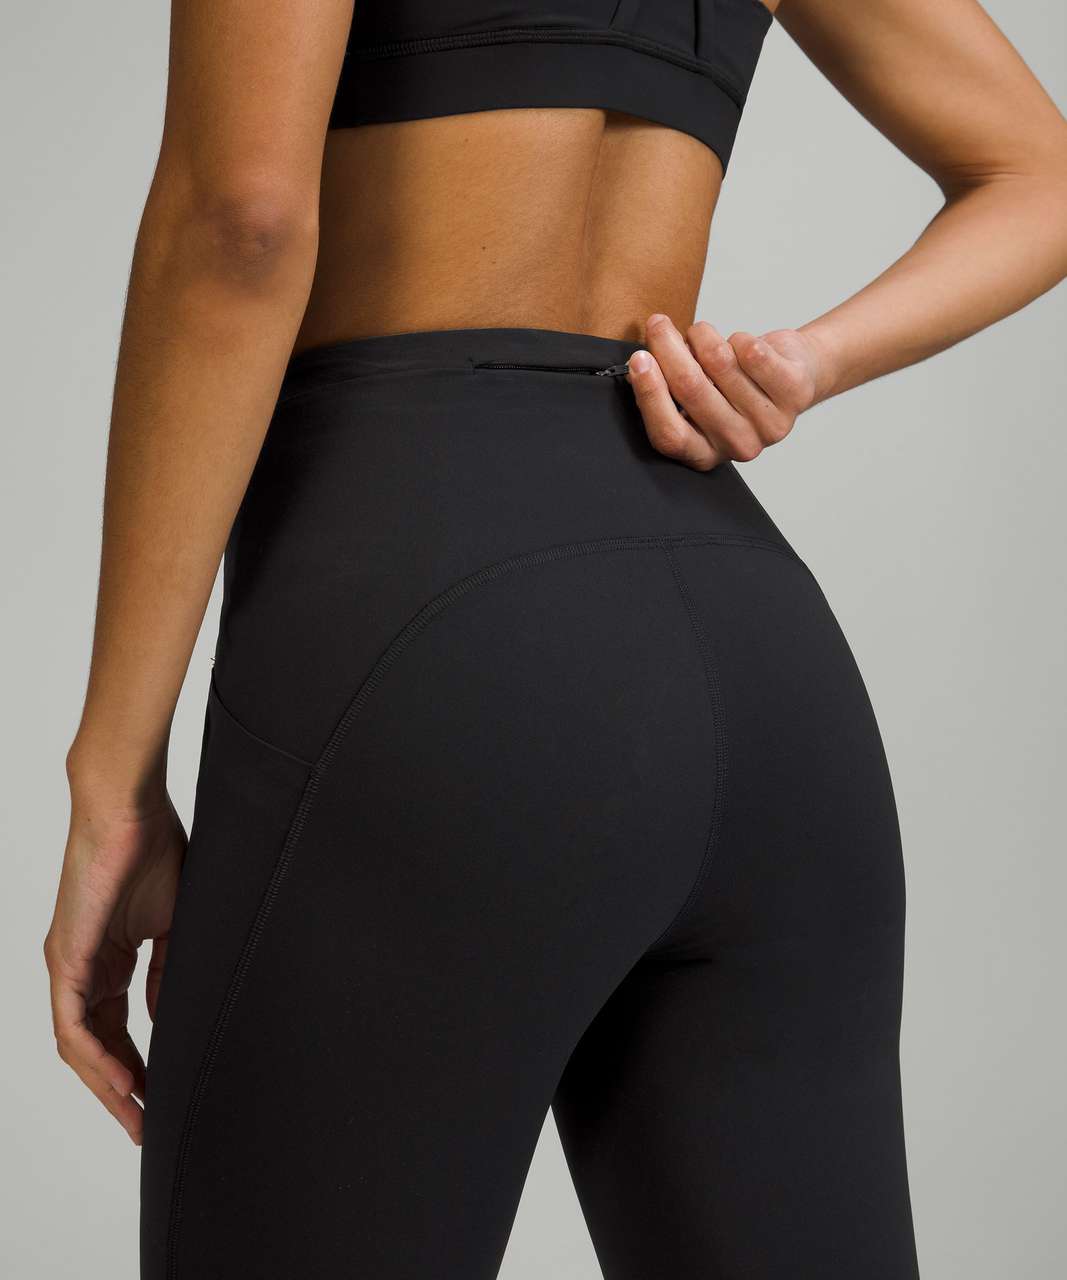 Lululemon Swift Speed High-Rise Tight 25" - Black (First Release)